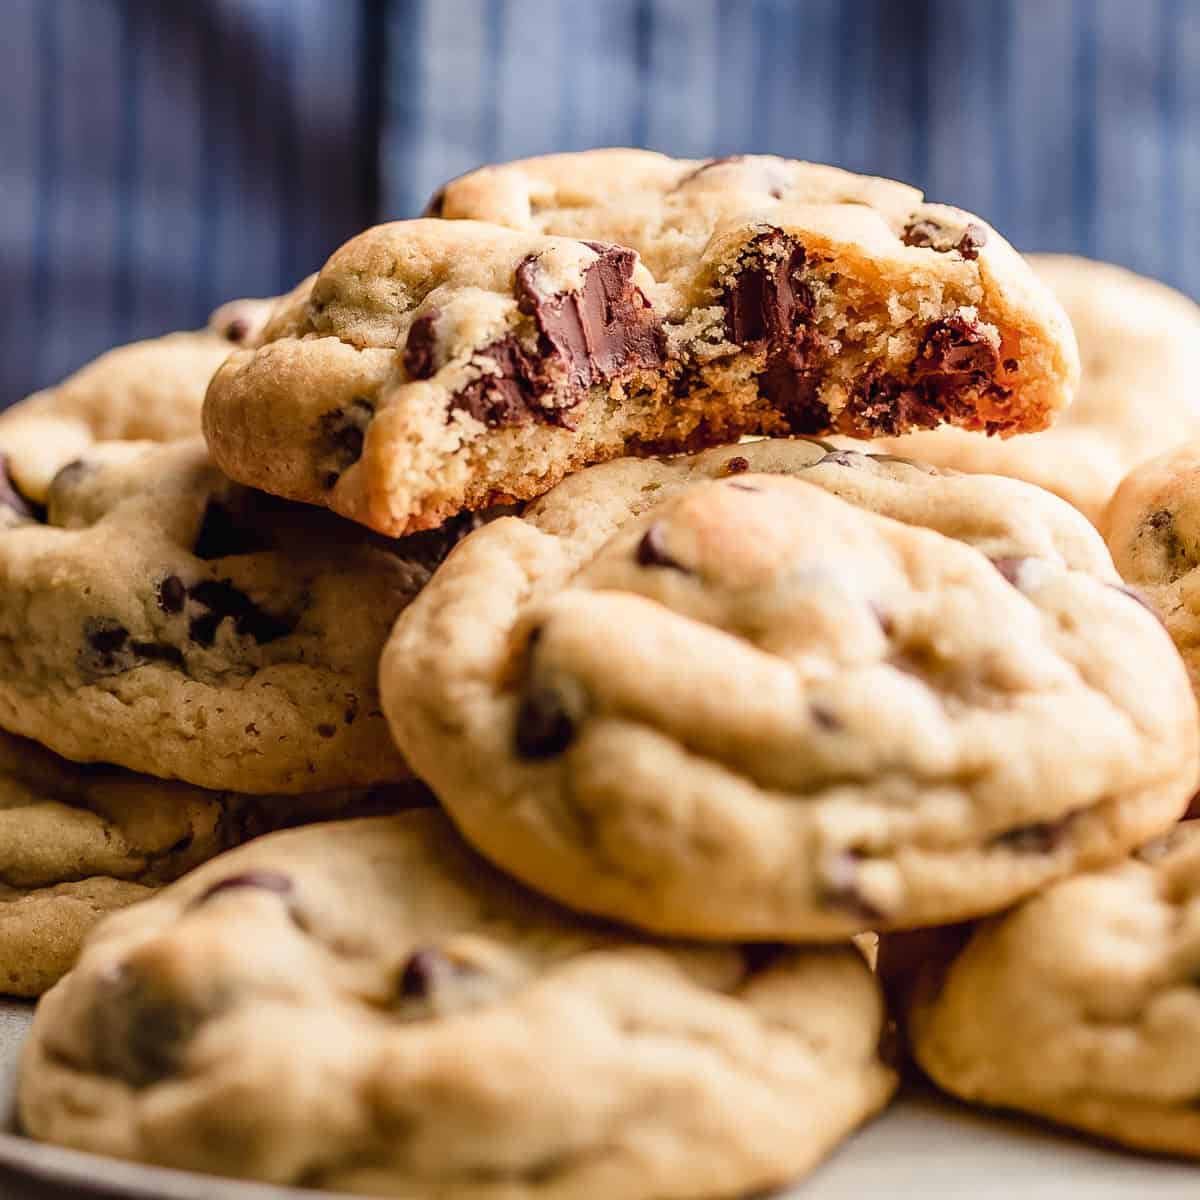 Chocolate chip cookies stacked on a plate.